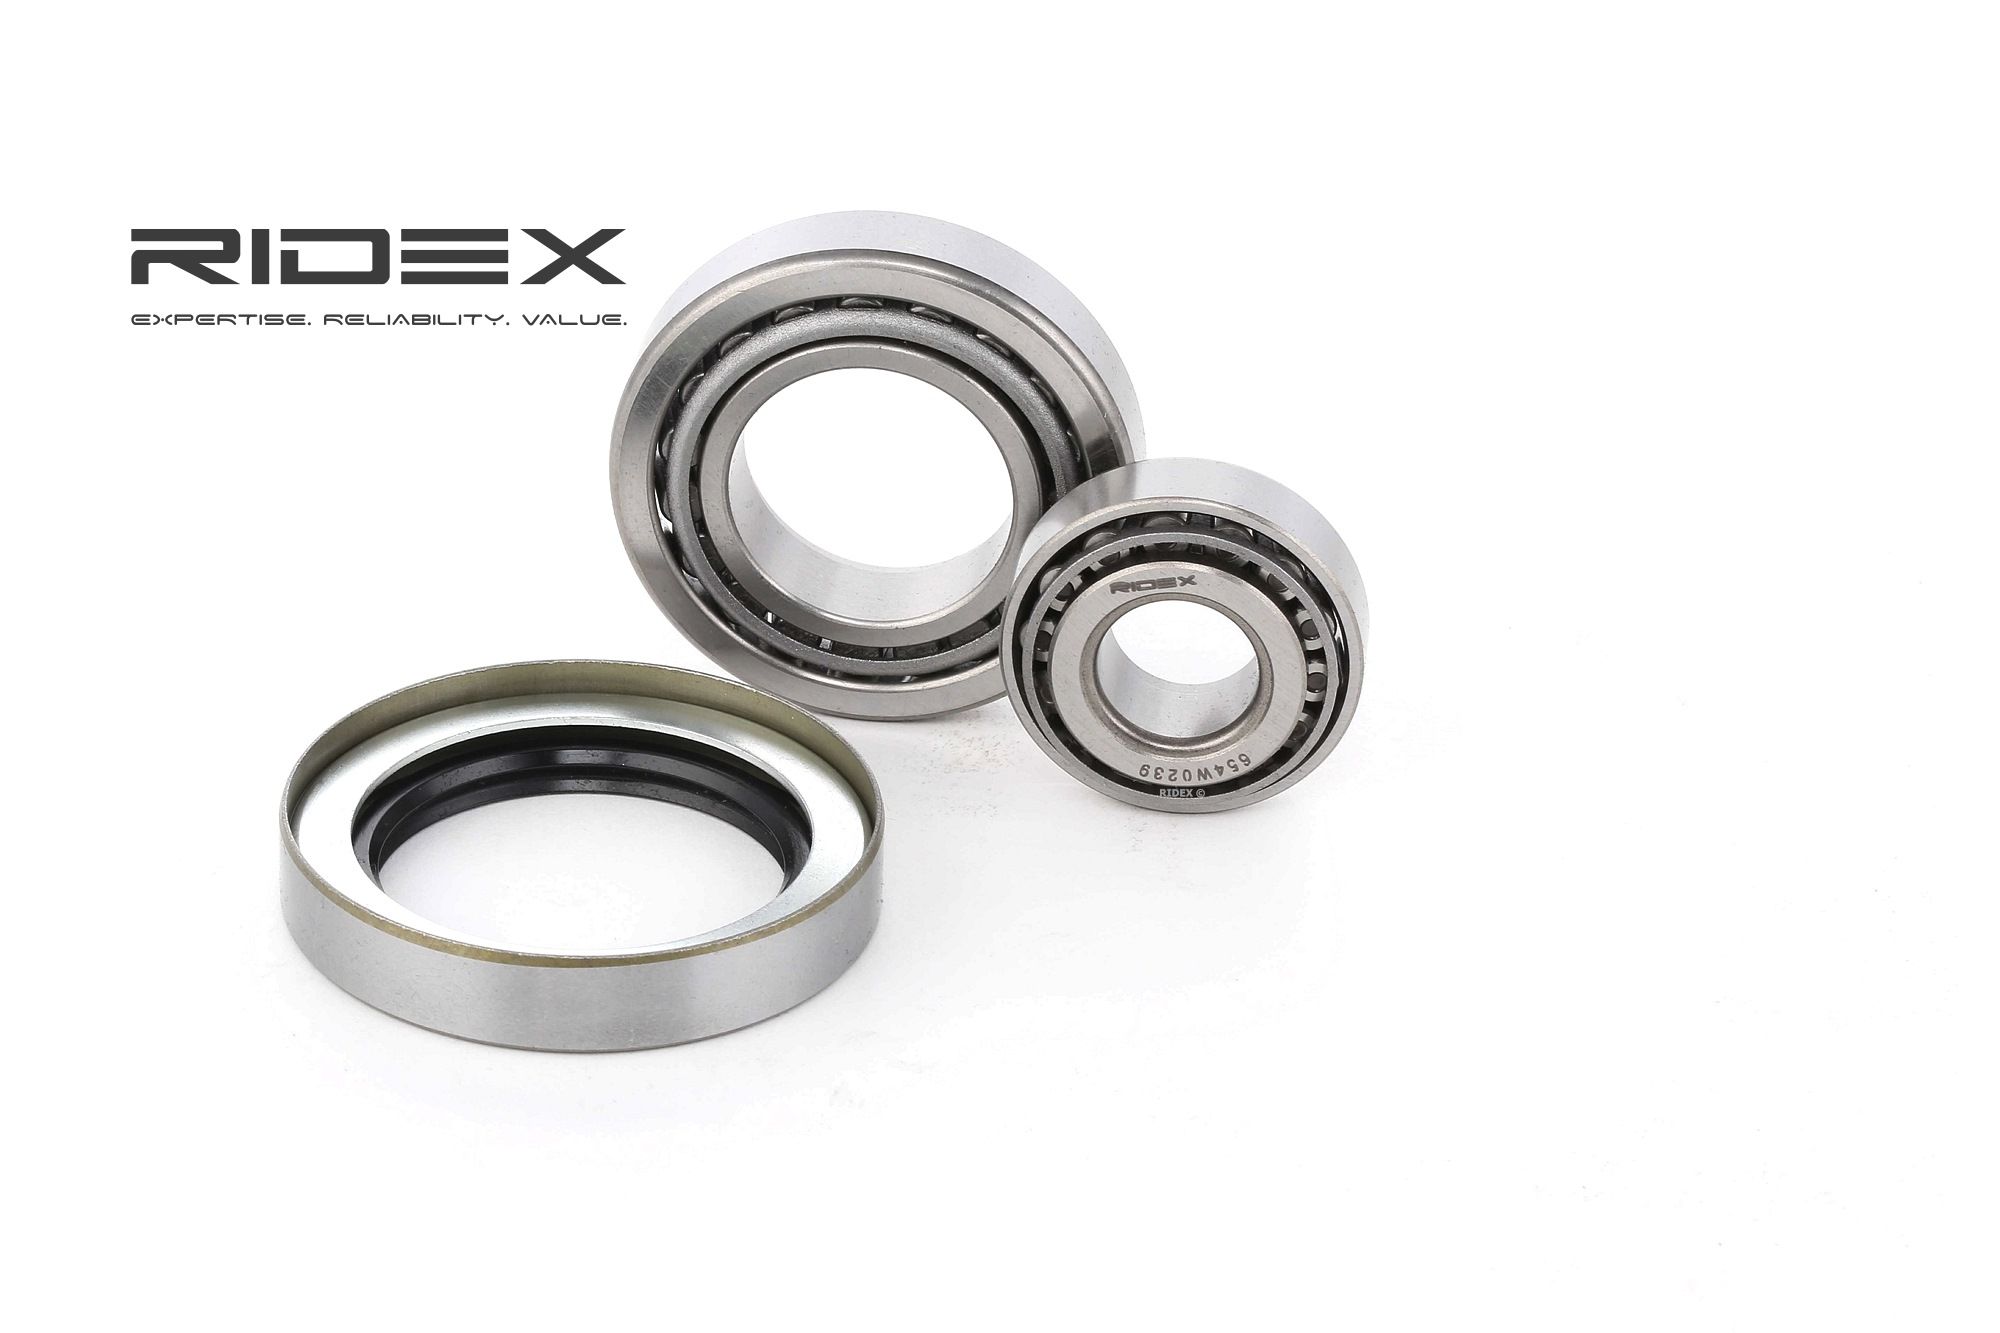 RIDEX 654W0239 Wheel bearing kit Front axle both sides, with attachment material, 50,3, 39,9, 59,1 mm